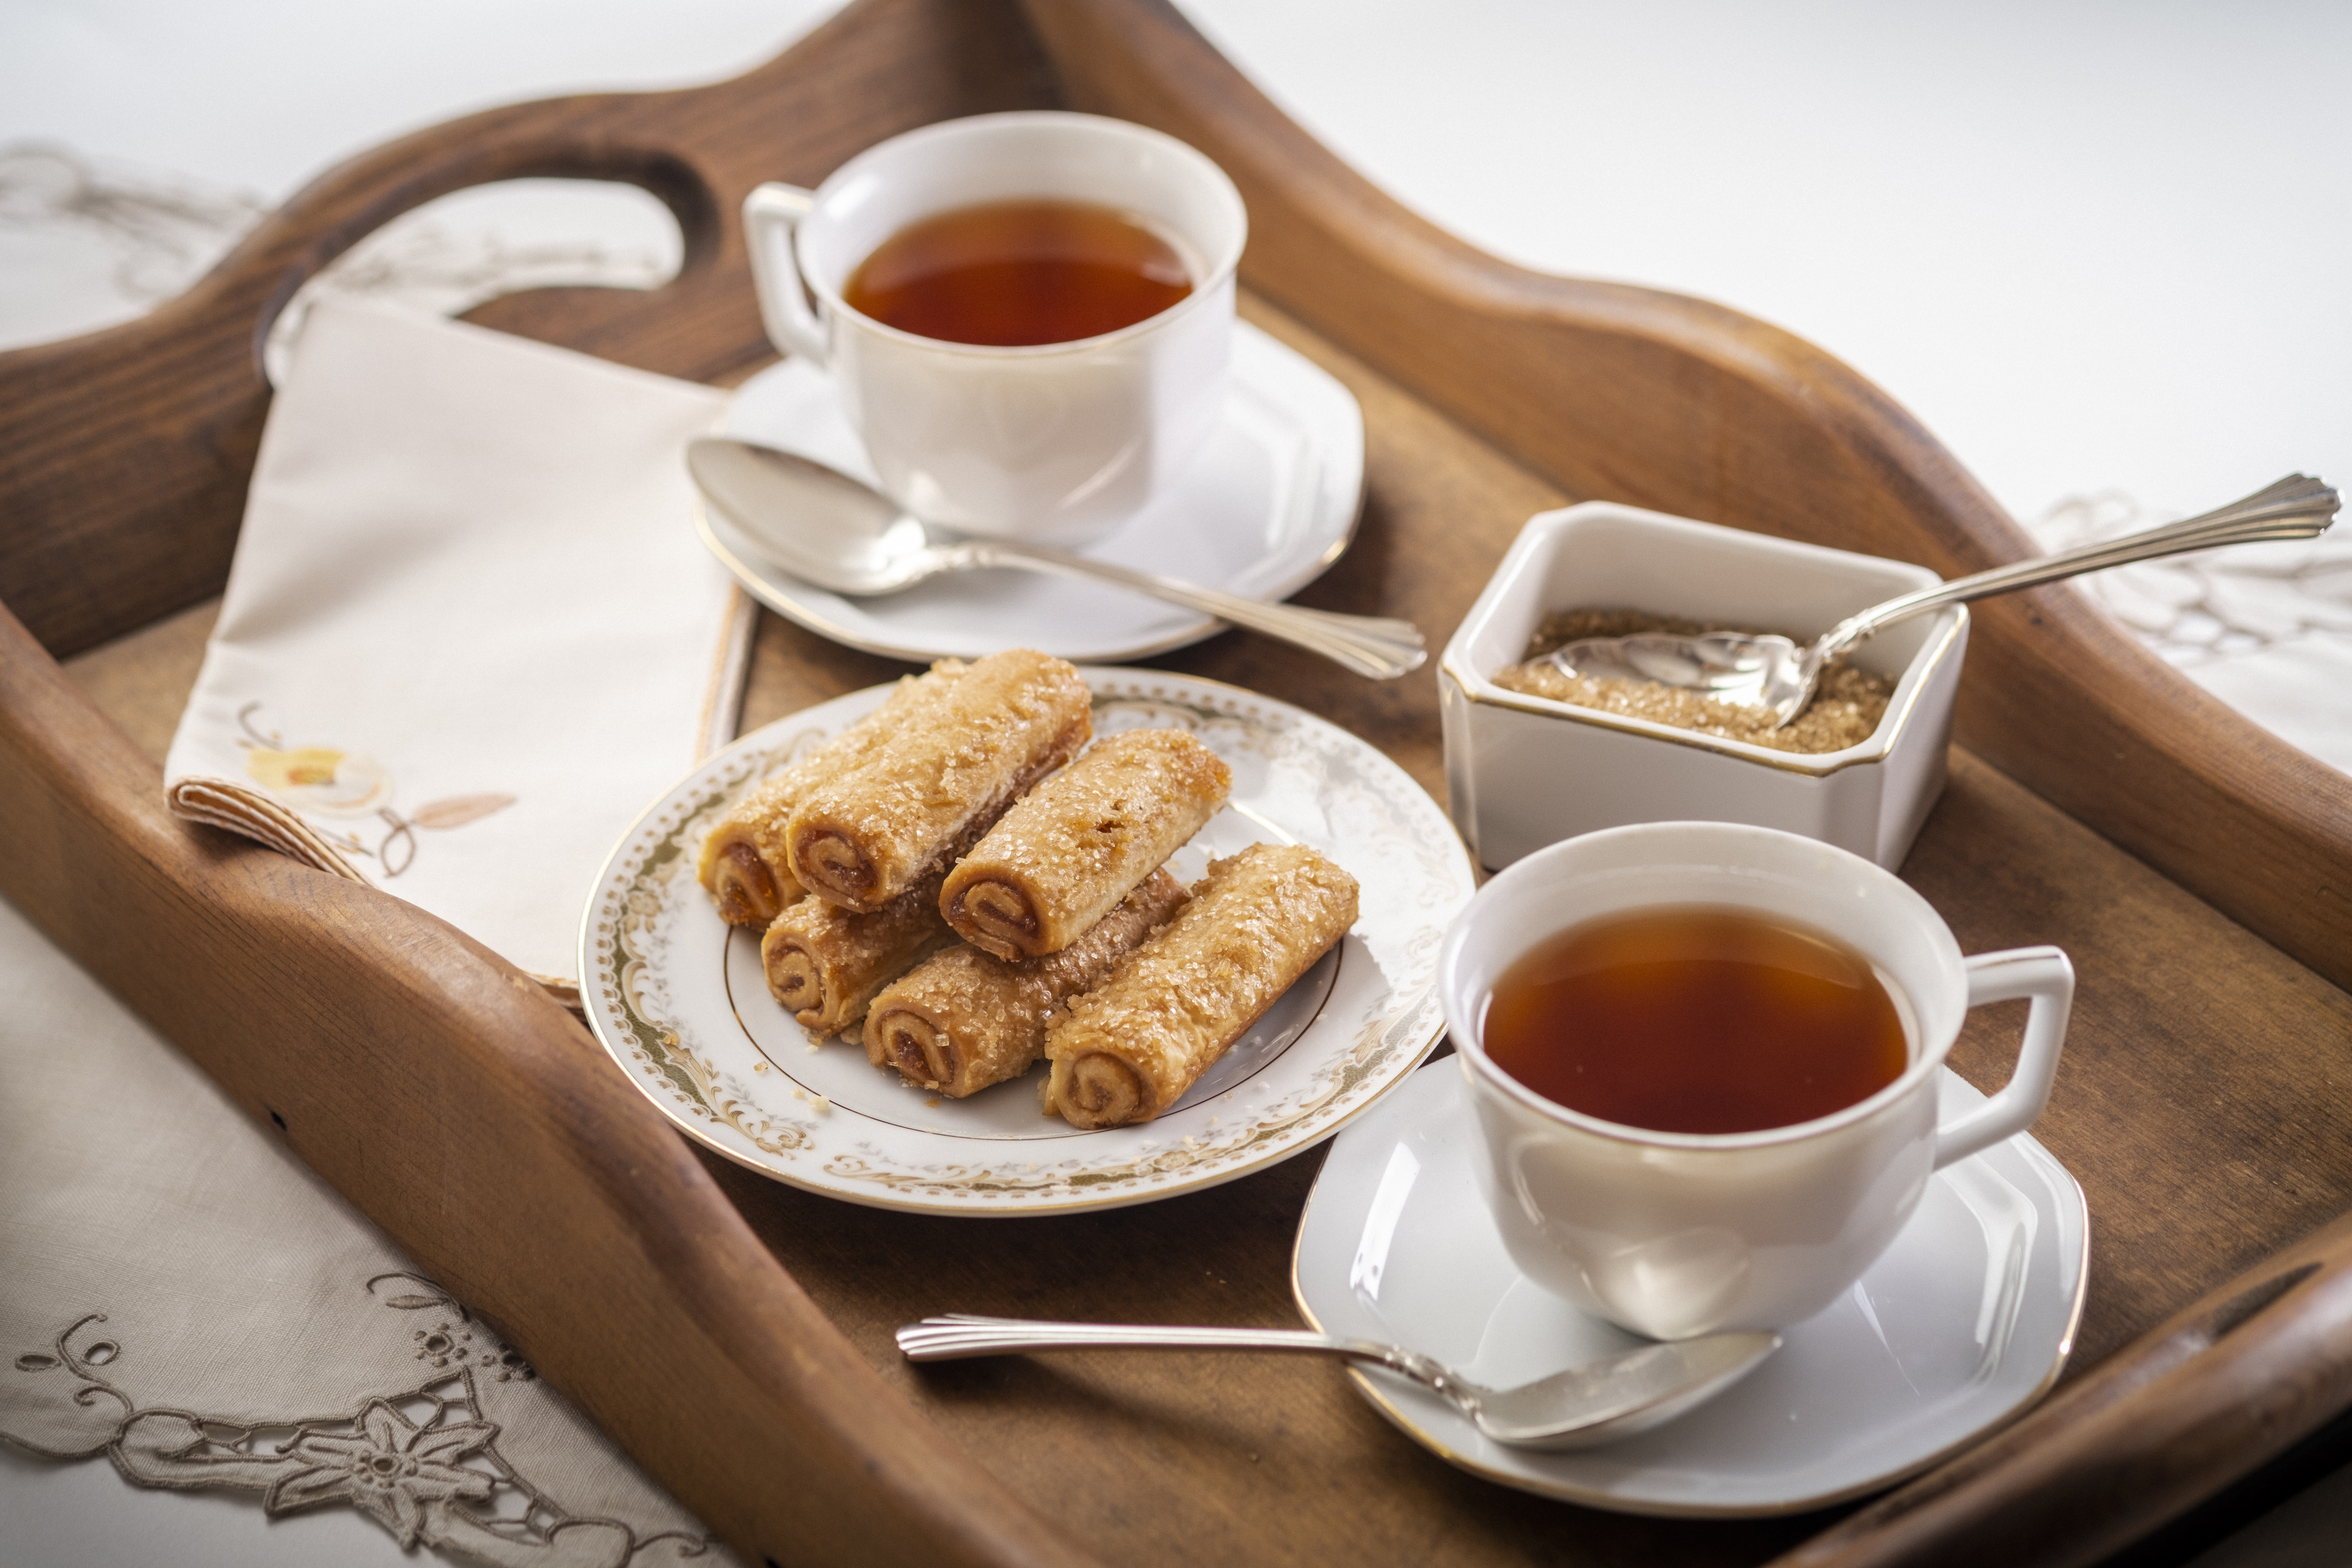 tray with a plate of fennome pastries, hot tea, and demerara sugar